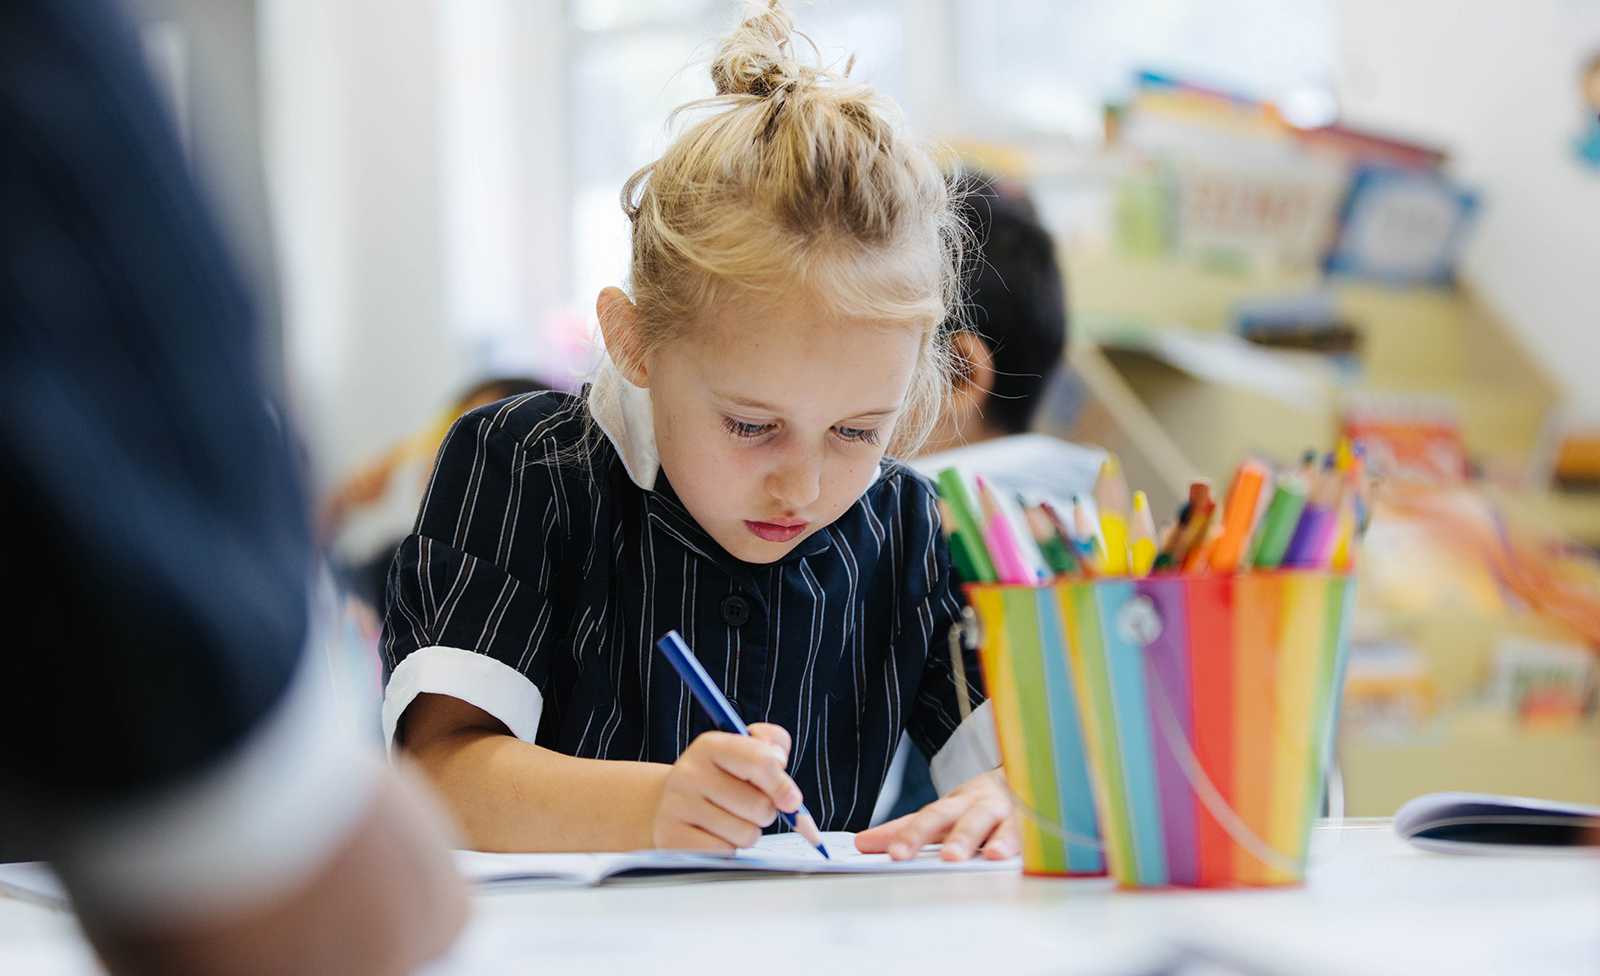 A focused, young, female school student working diligently at desk with coloured pencils